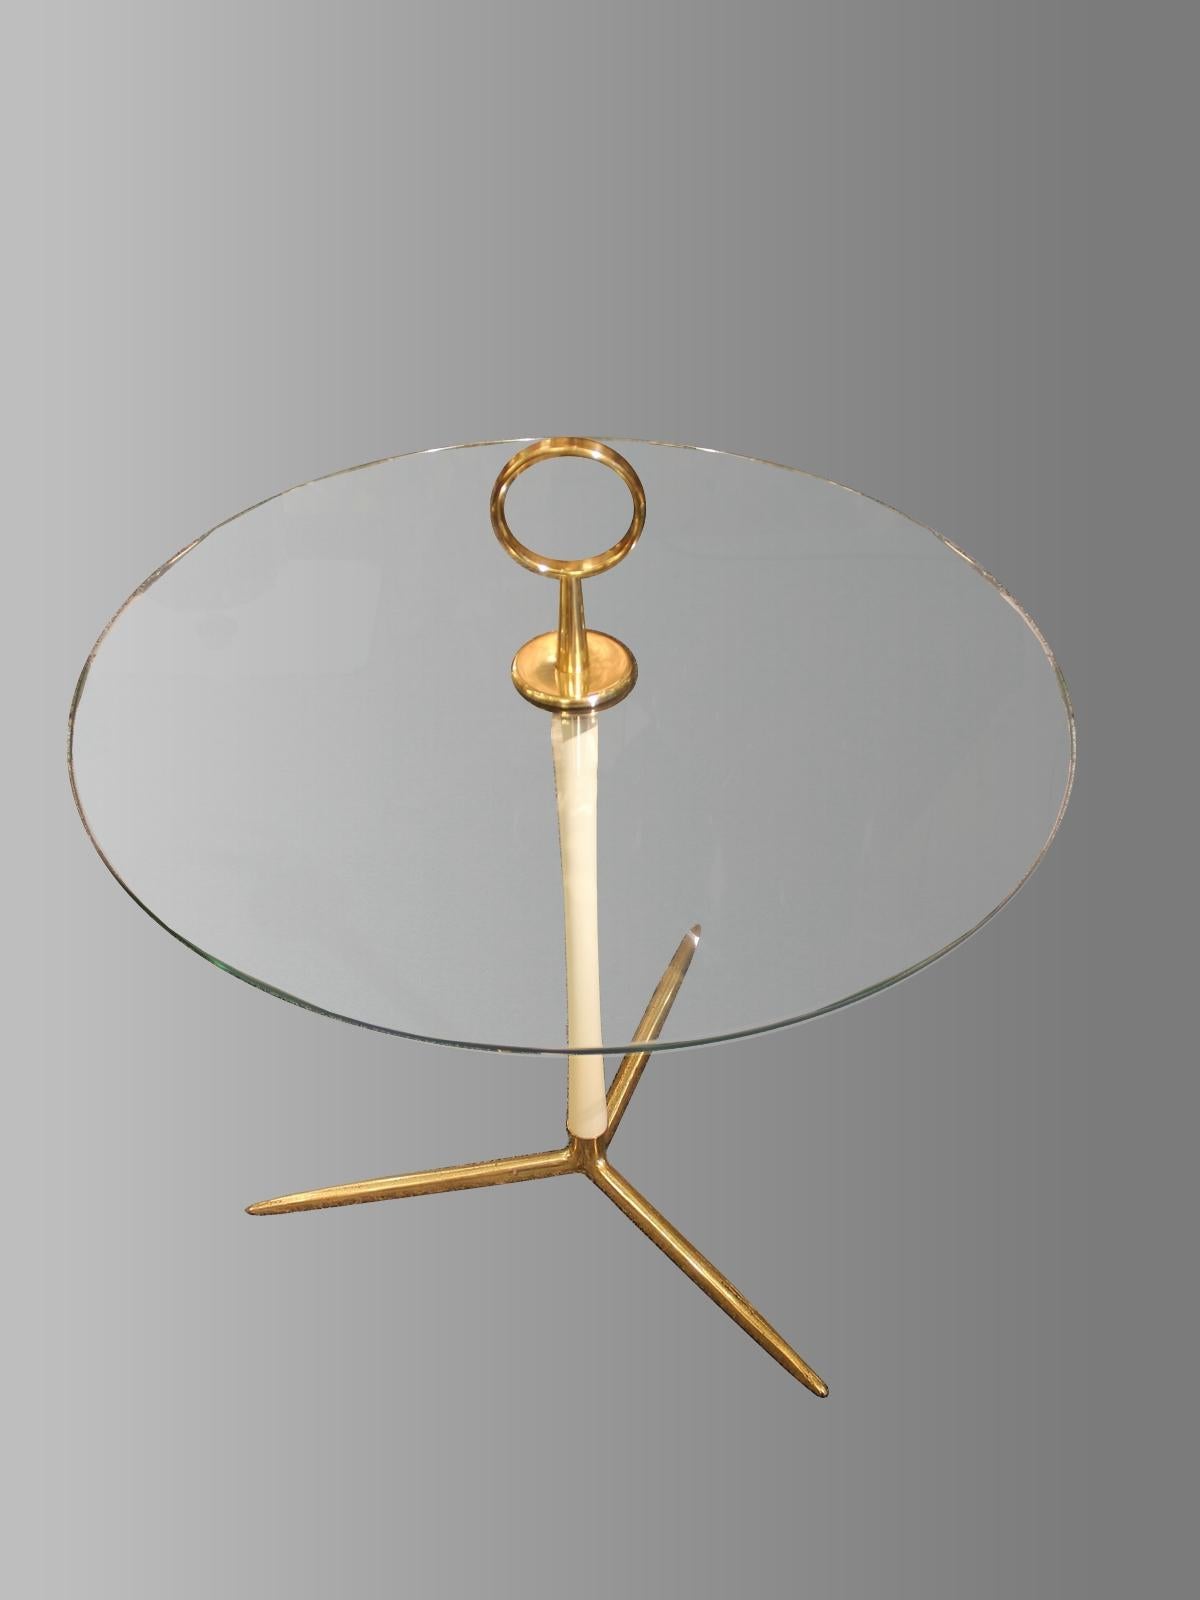 Circular pedestal table with handle
Italian work, circa 1950
Brass, off-white lacquered metal, glass.

Measures: Height 24.8 in
Platform height 18.5 in
Diameter 23.6 in.